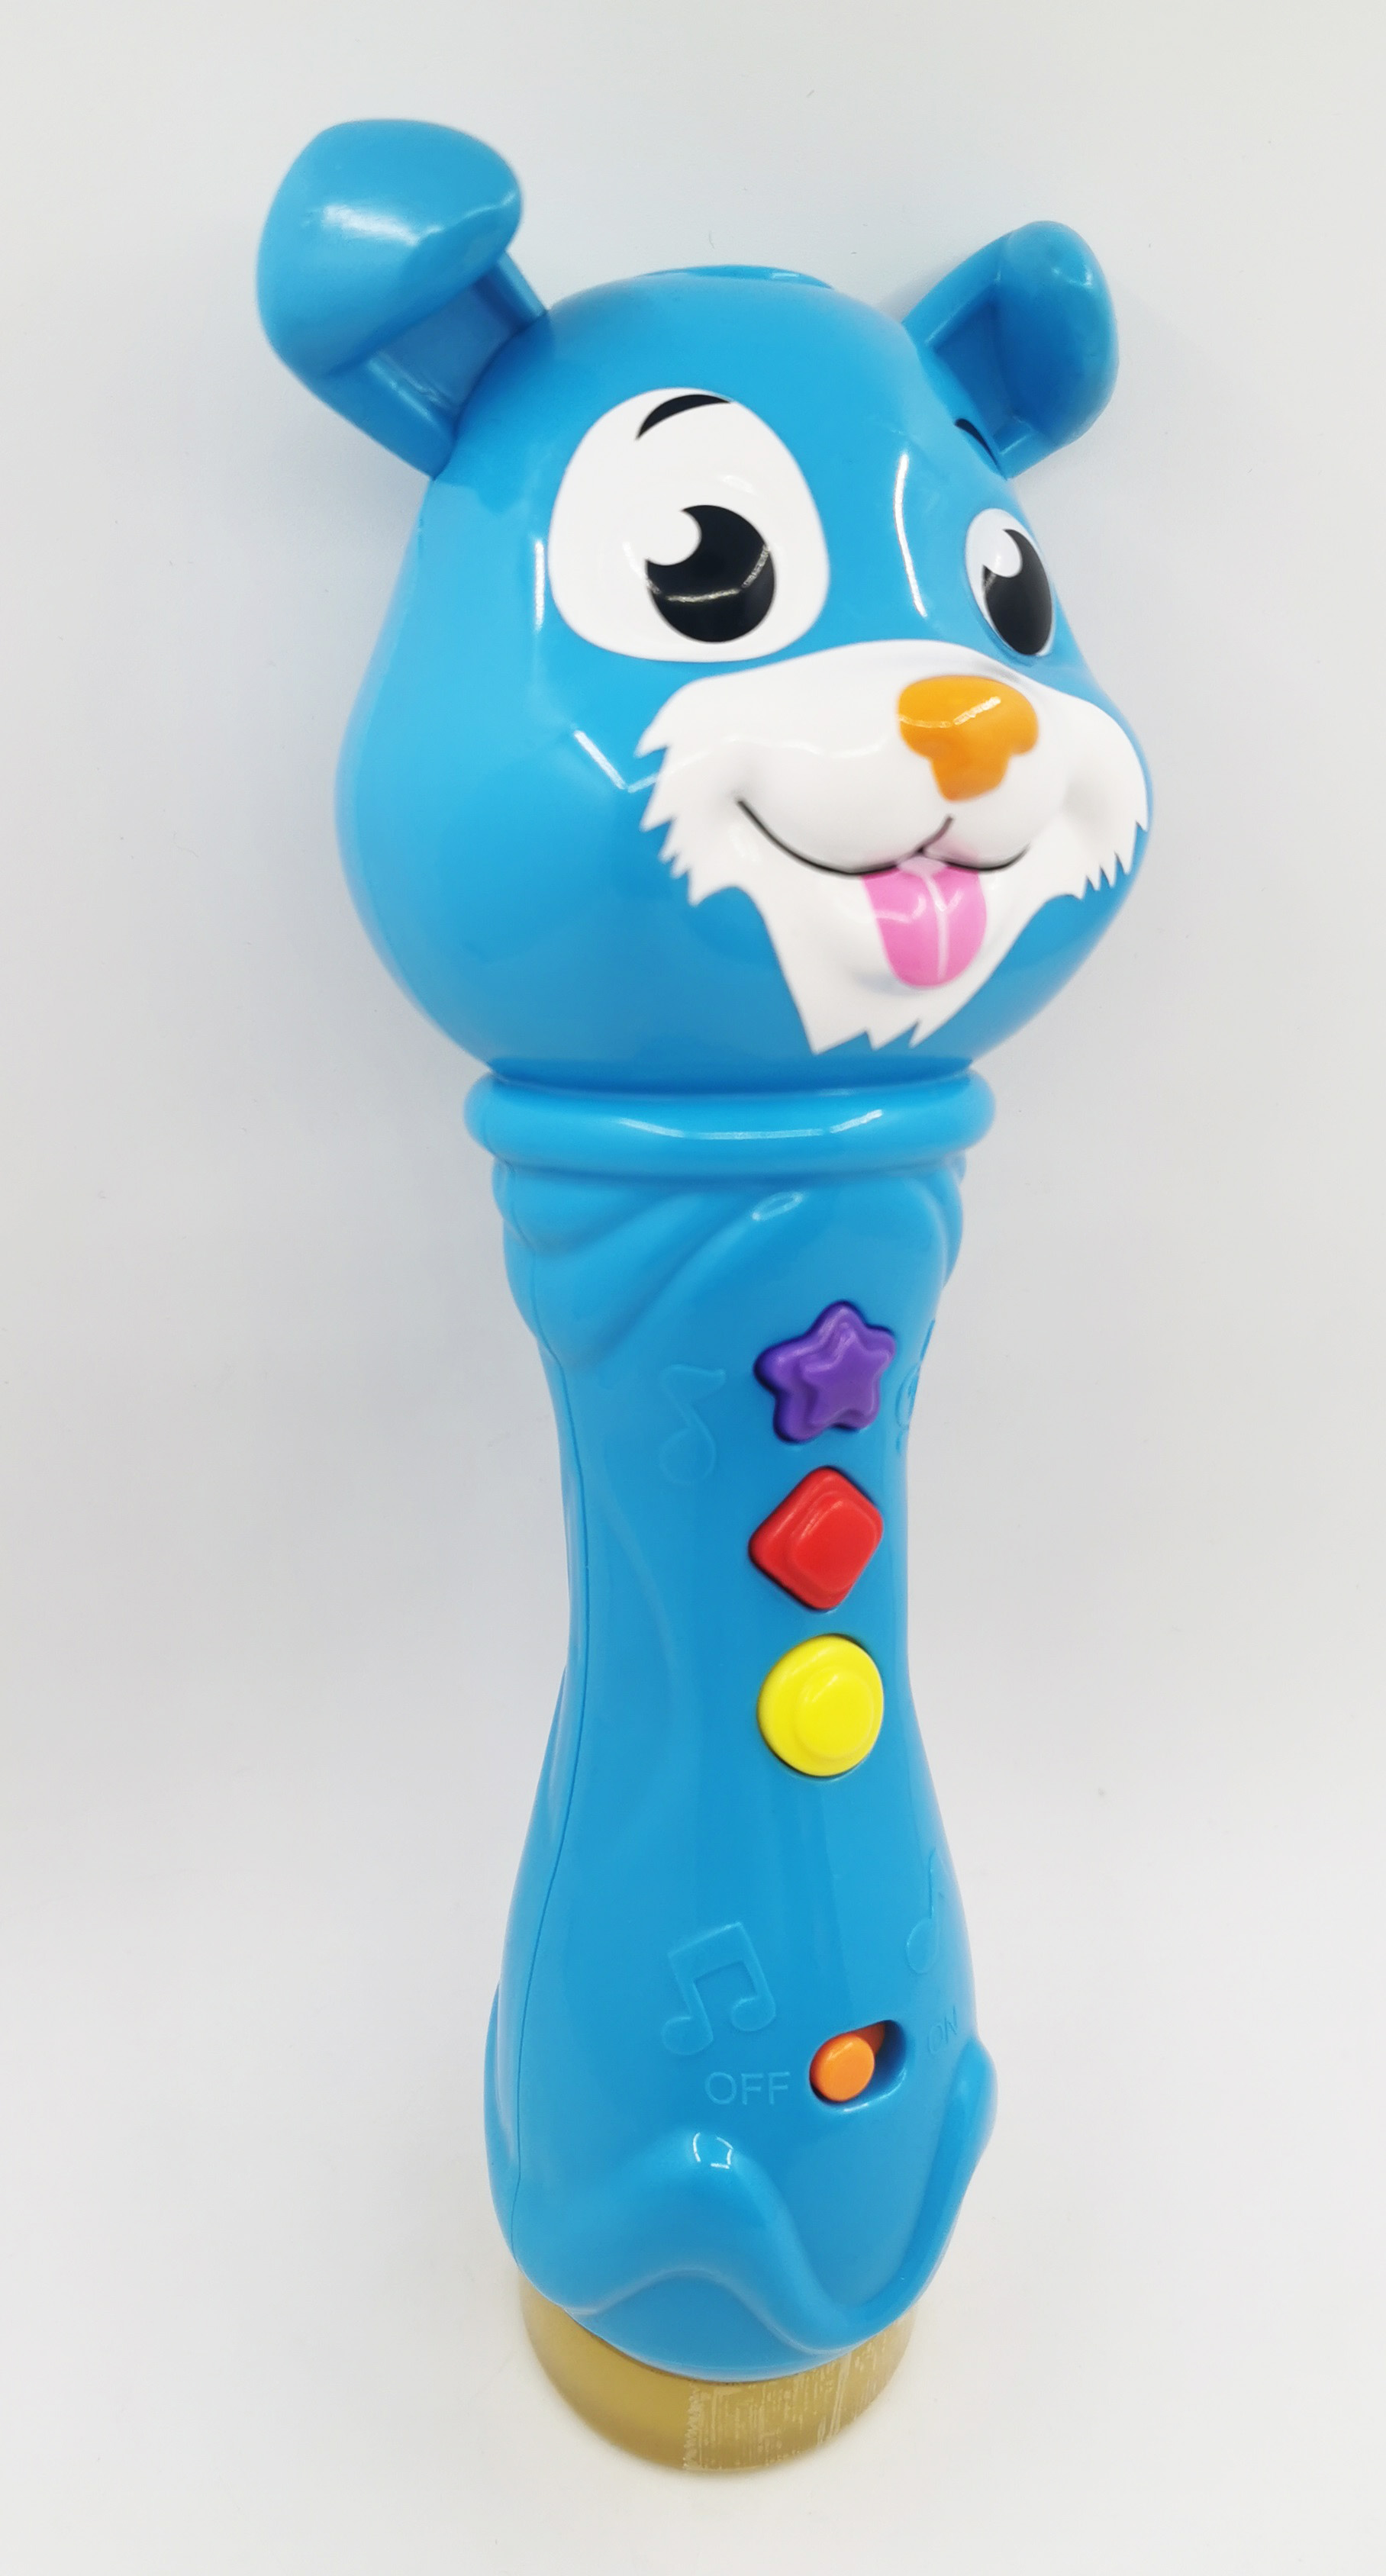 Spark Create Imagine Sing Along Dog Microphone for Kids, Cognitive Development, Ages 3 and Up, Blue - image 5 of 6